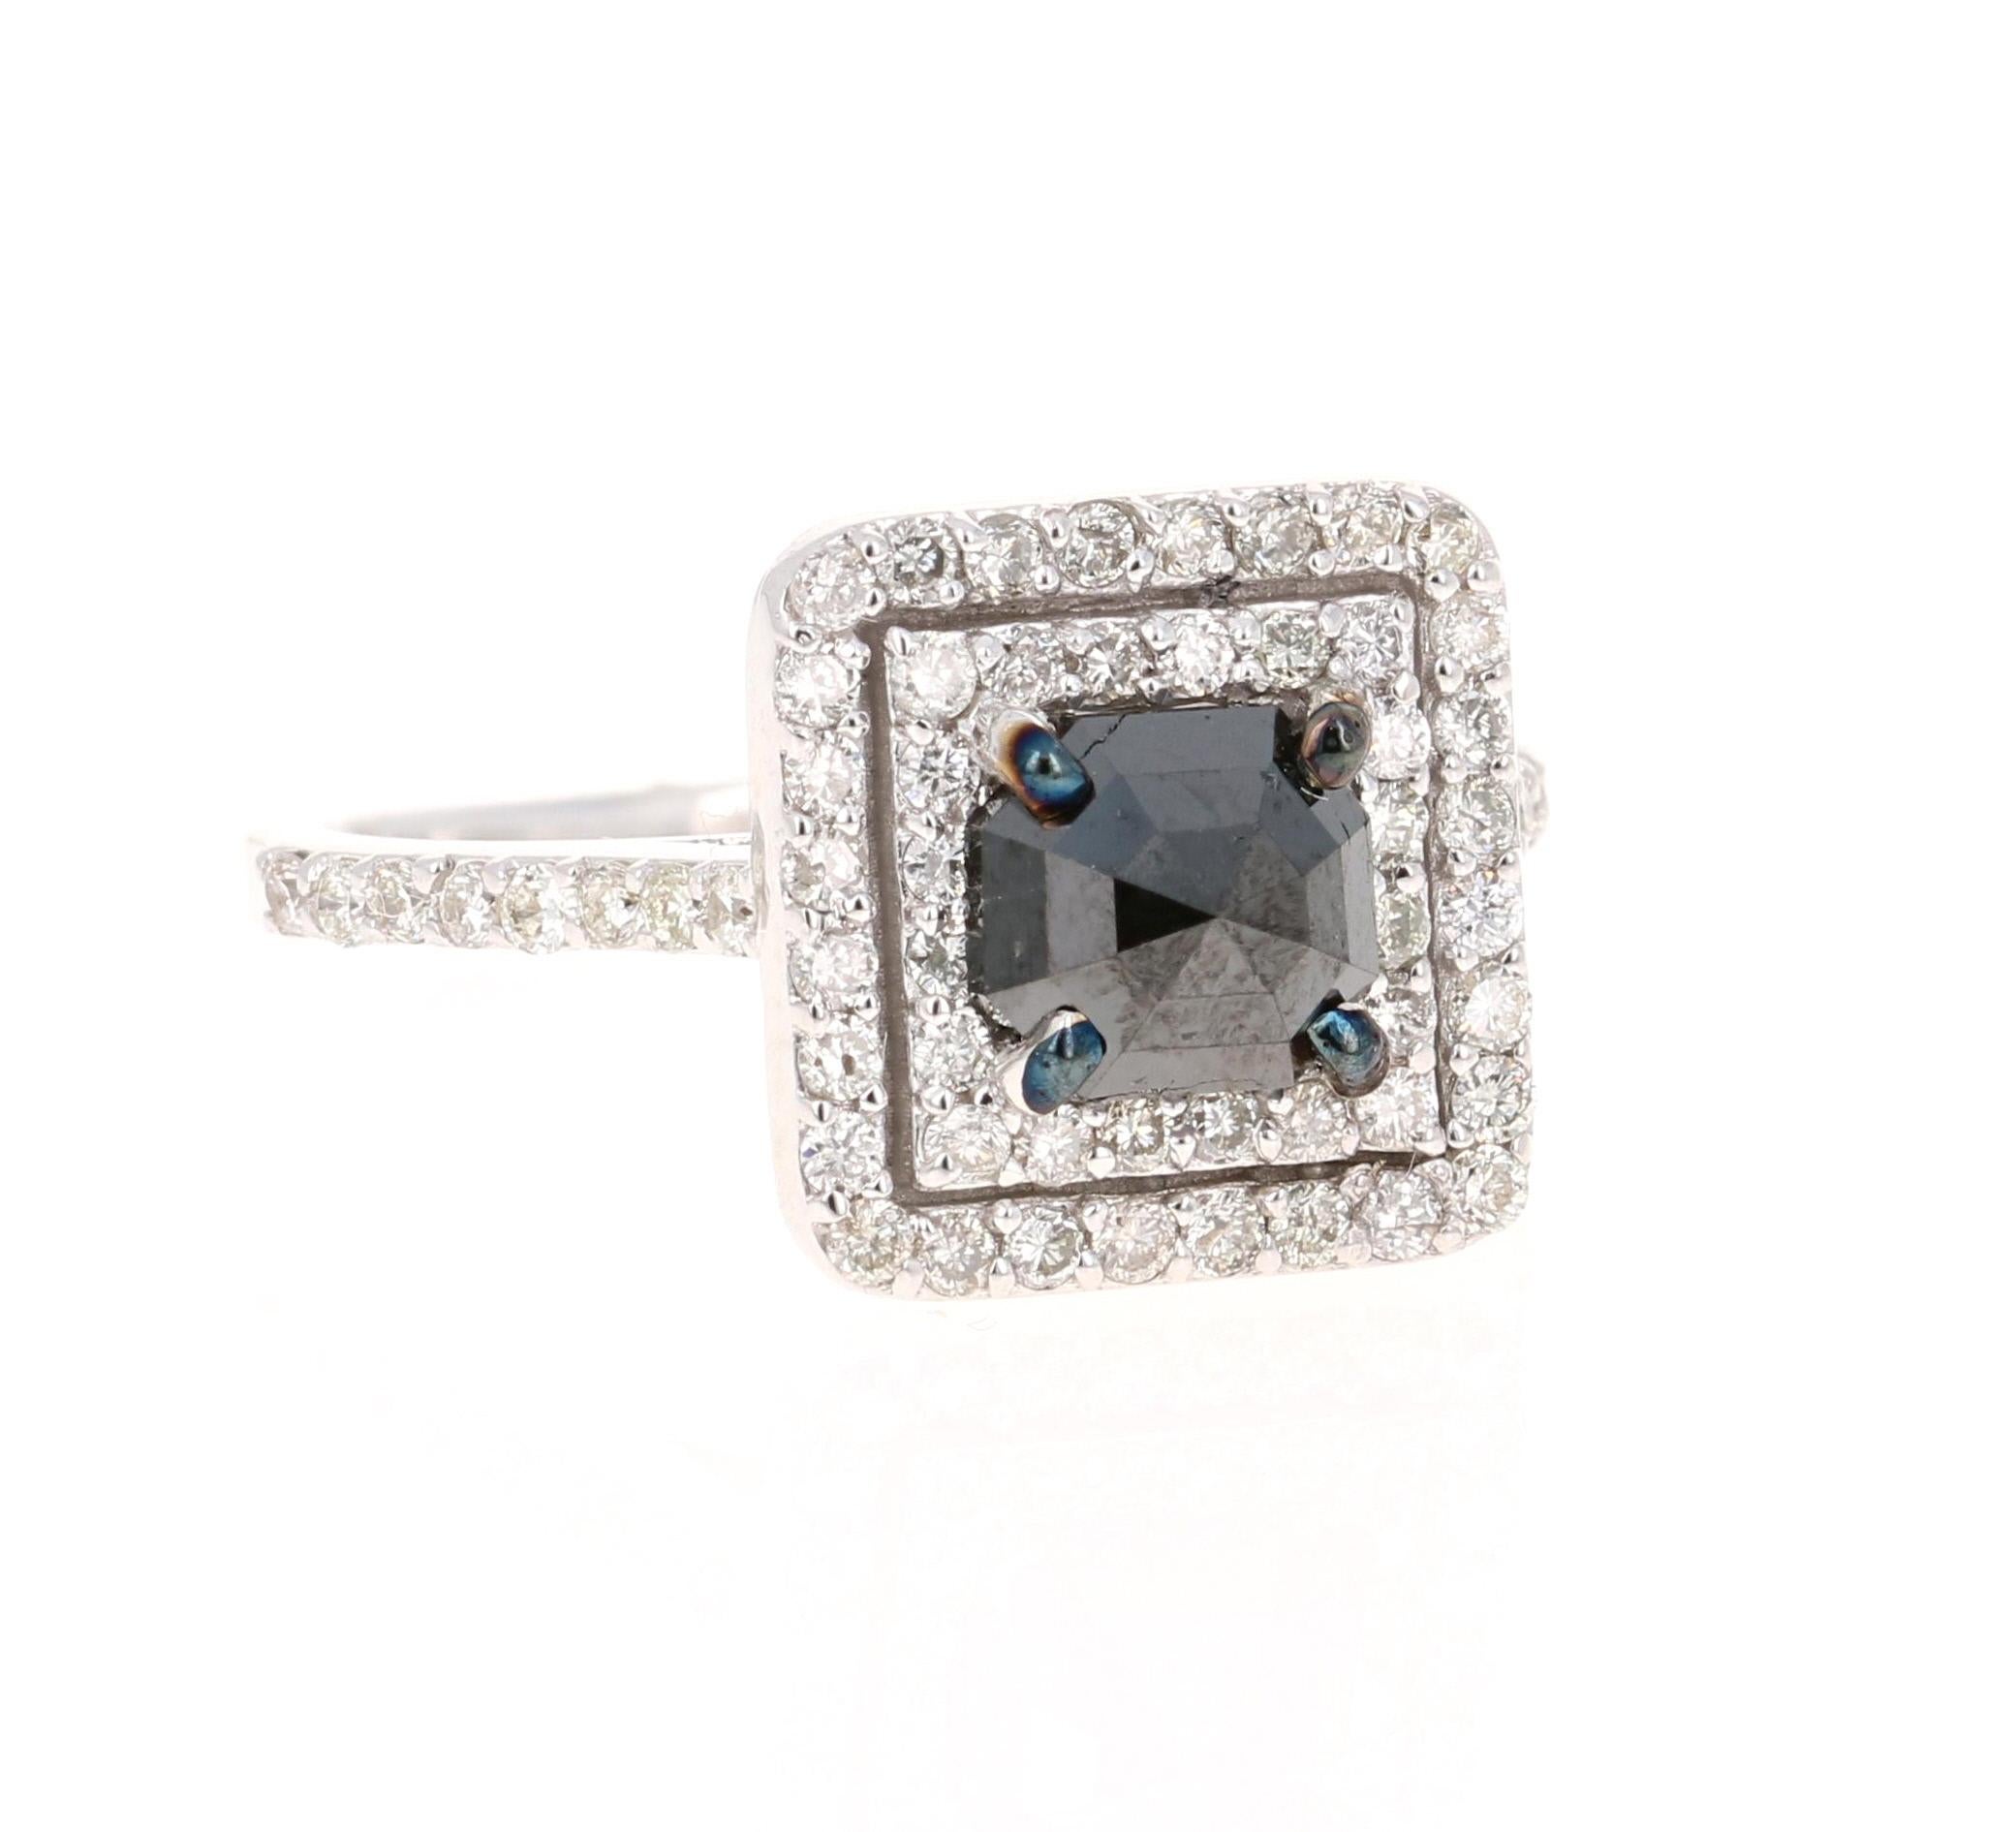 This Black and White Diamond Ring is a unique Engagement Ring or an every day ring

Beautiful Cushion Cut Black Diamond that weighs 1.07 Carats and is surrounded by 64 Round Cut Diamonds that weigh 0.79 Carats. The total carat weight of the ring is